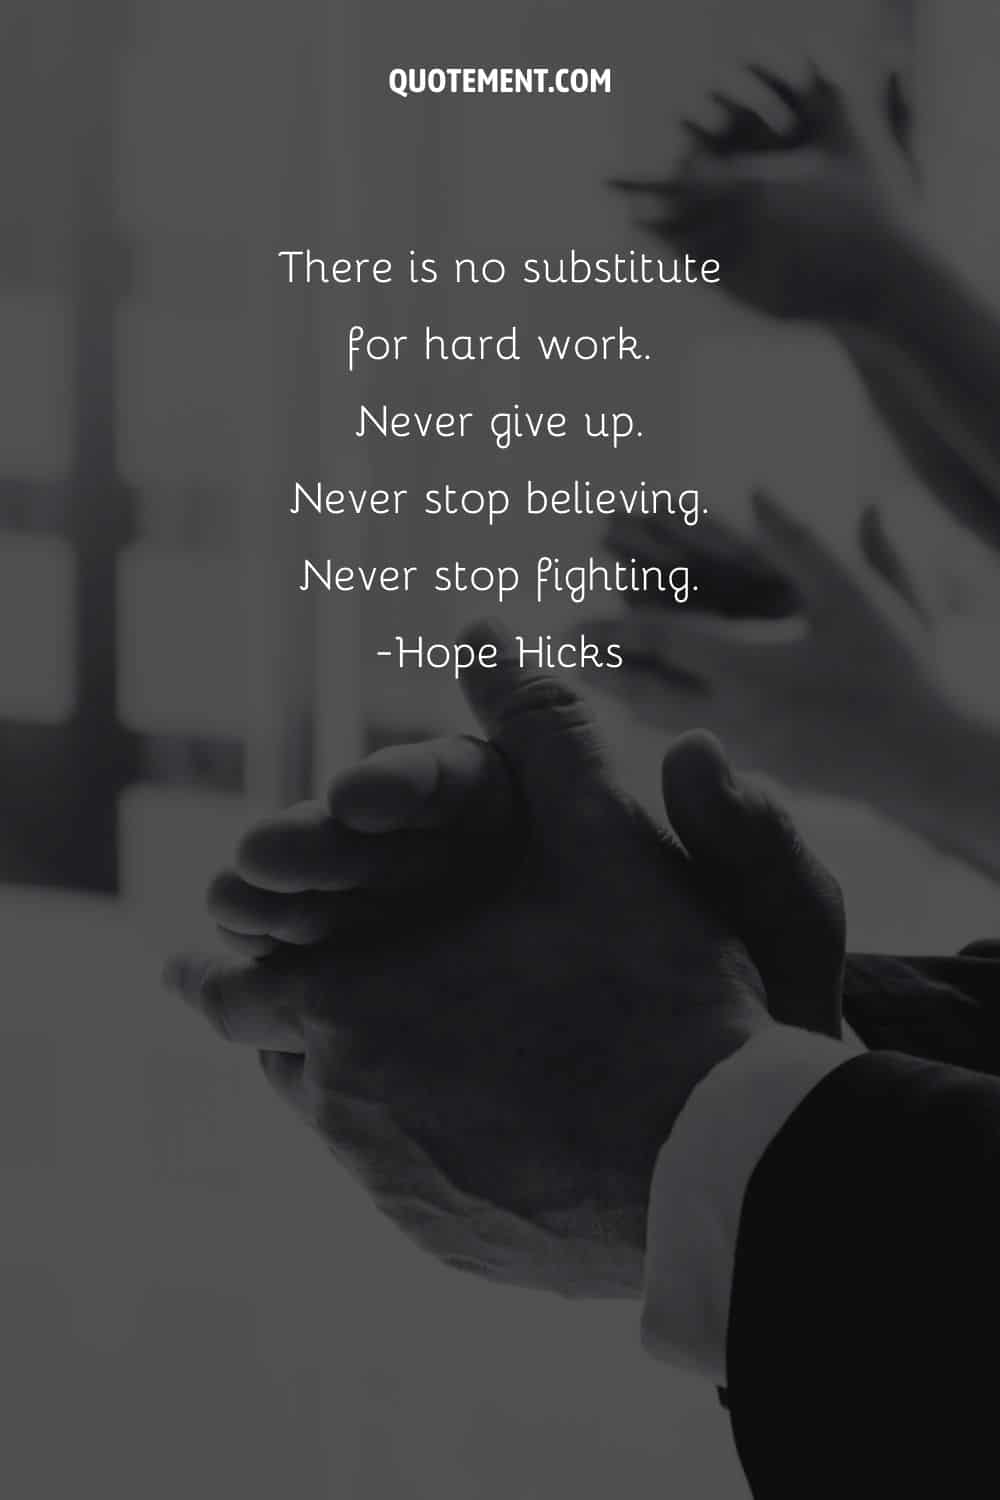 There is no substitute for hard work. Never give up